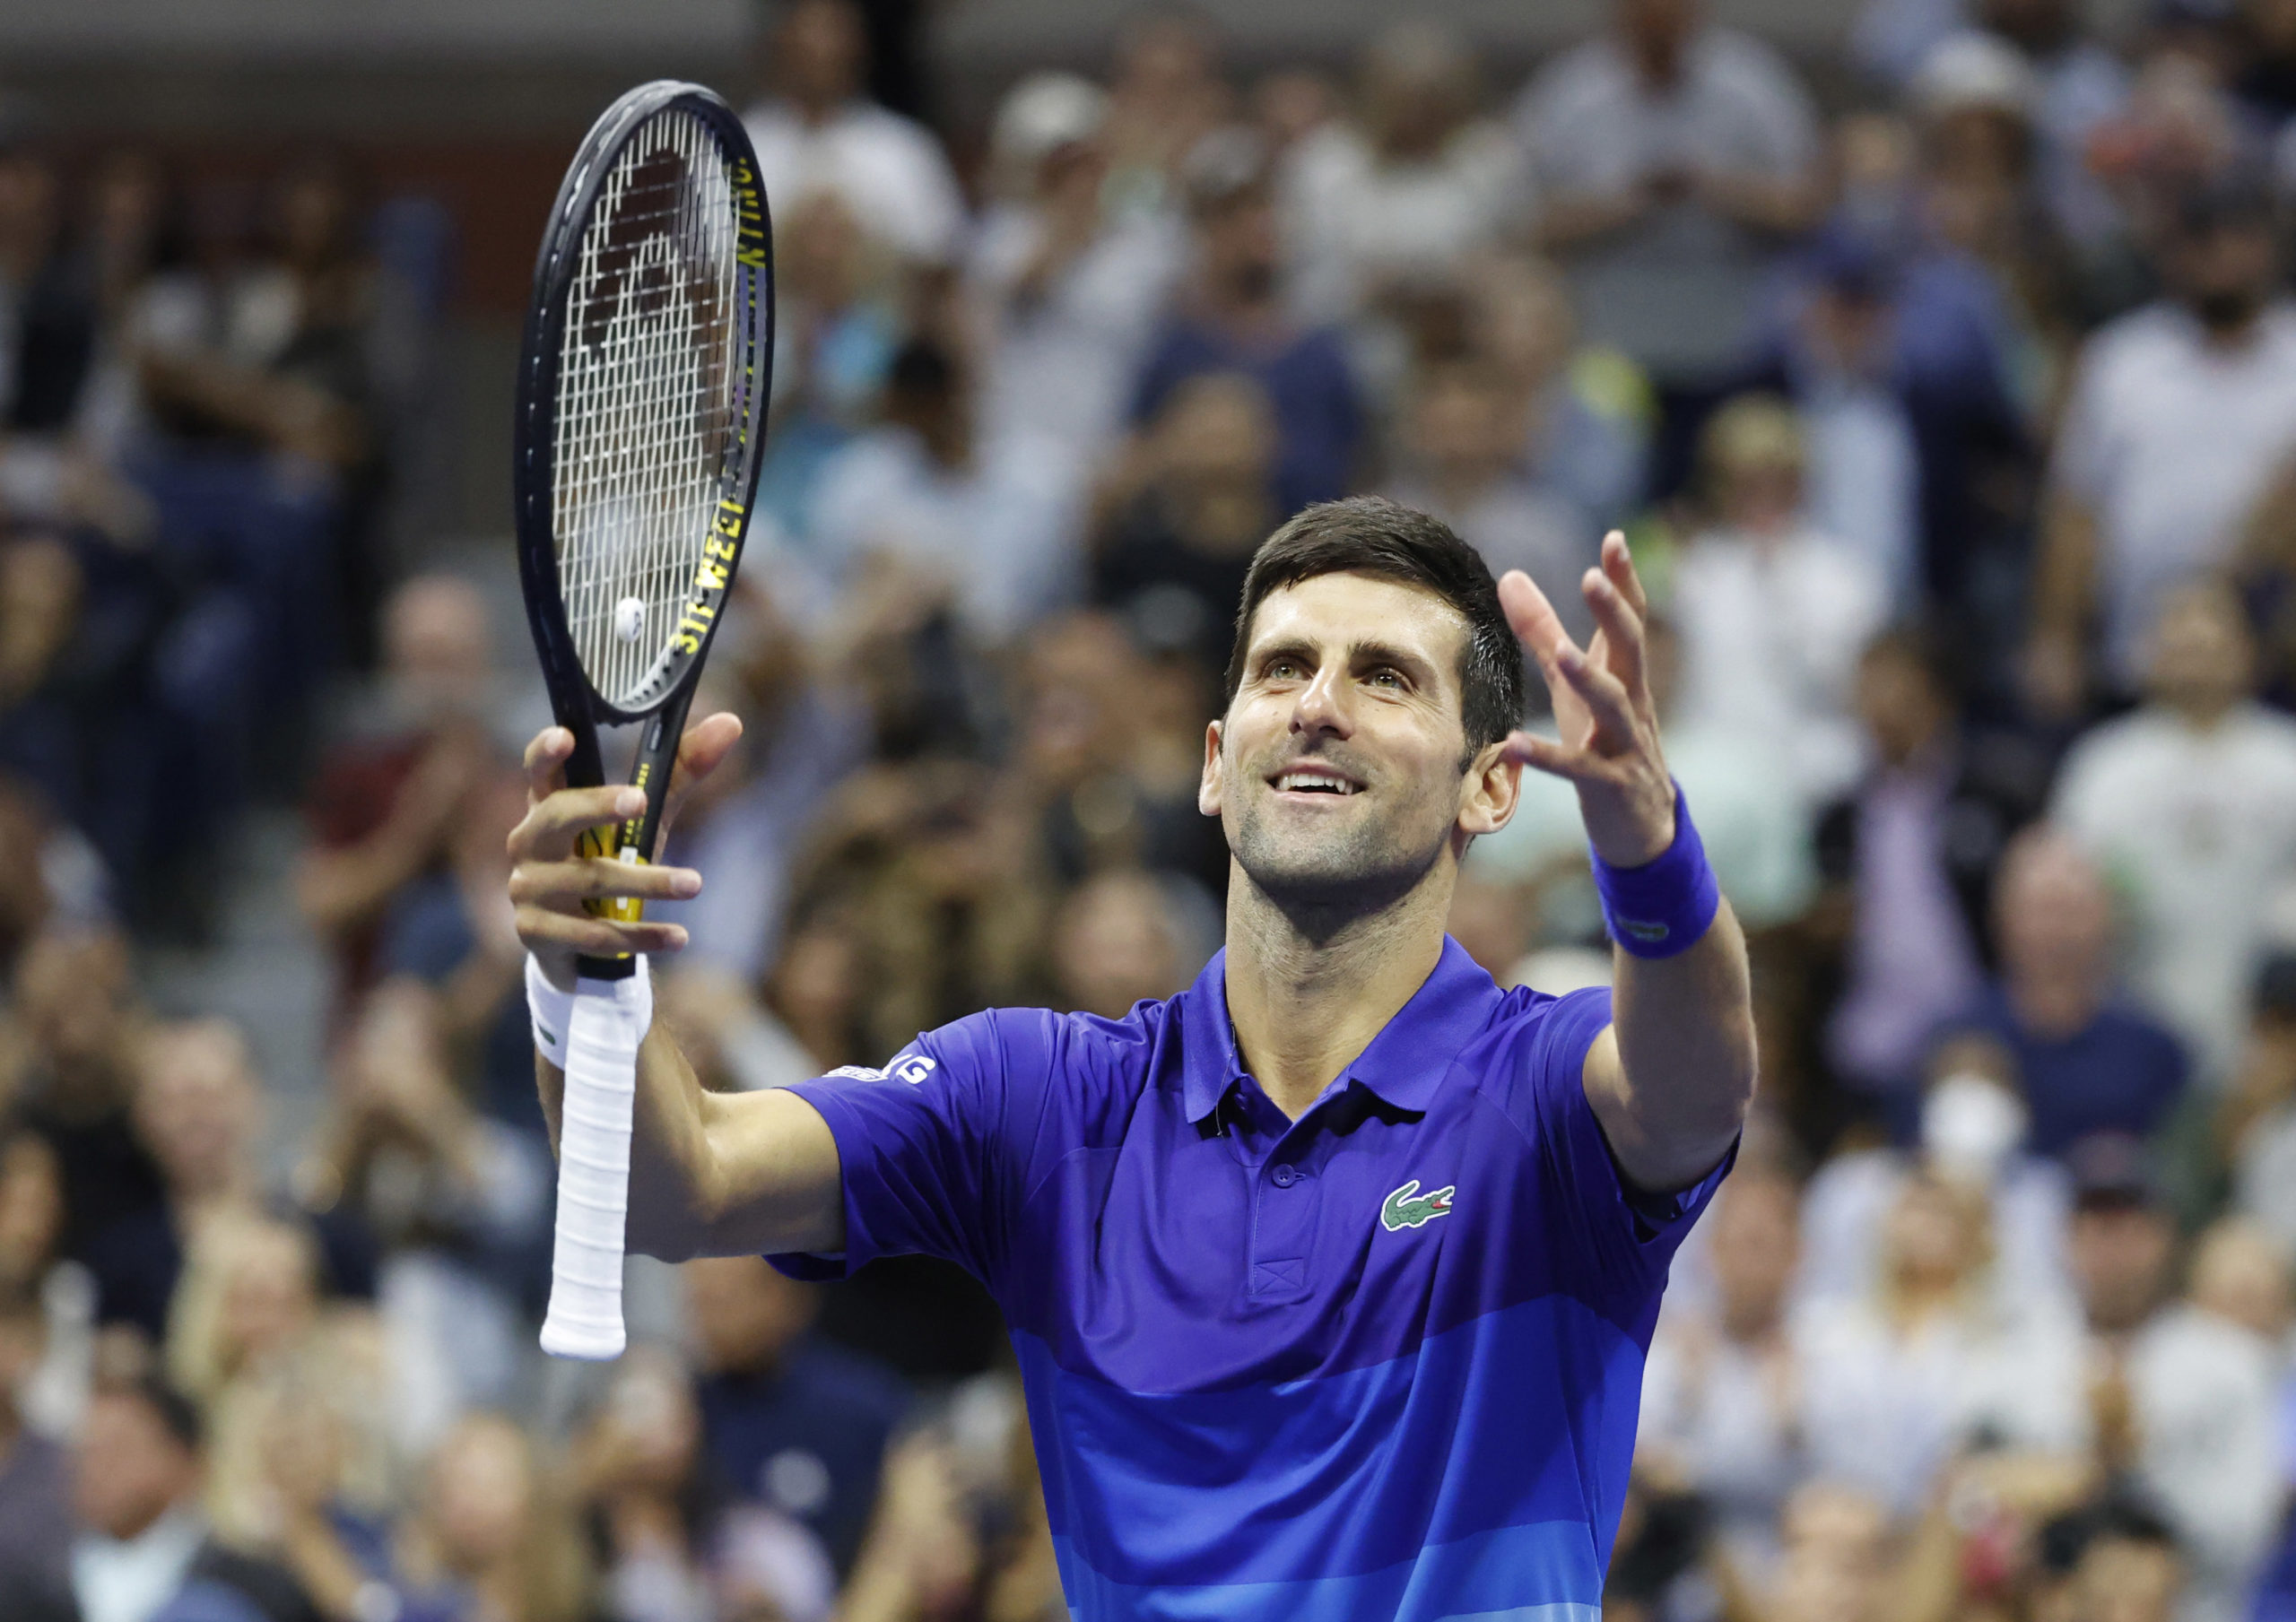  Novak Djokovic of Serbia celebrates after recording match point against Tallon Griekspoor of Netherlands in a second round match on day four of the 2021 U.S. Open tennis tournament at USTA Billie Jean King National Tennis Center.